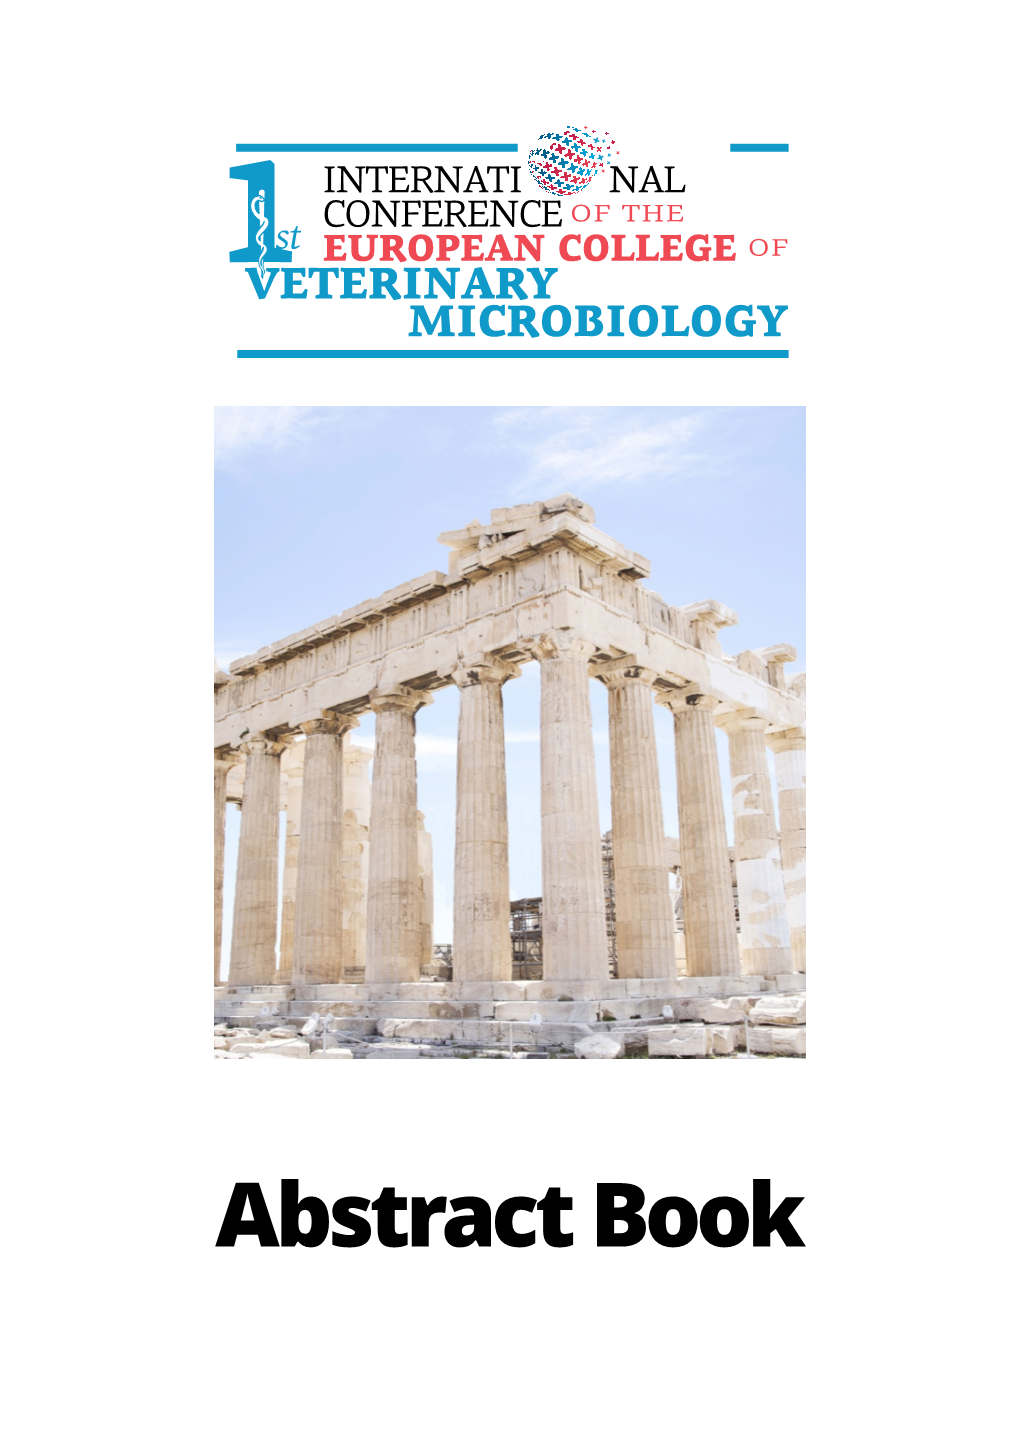 Abstract Book Abstract Book of the 1ST INTERNATIONAL CONFERENCE of the EUROPEAN COLLEGE of VETERINARY MICROBIOLOGY Athens, Greece, 26Th-27Th September, 2019